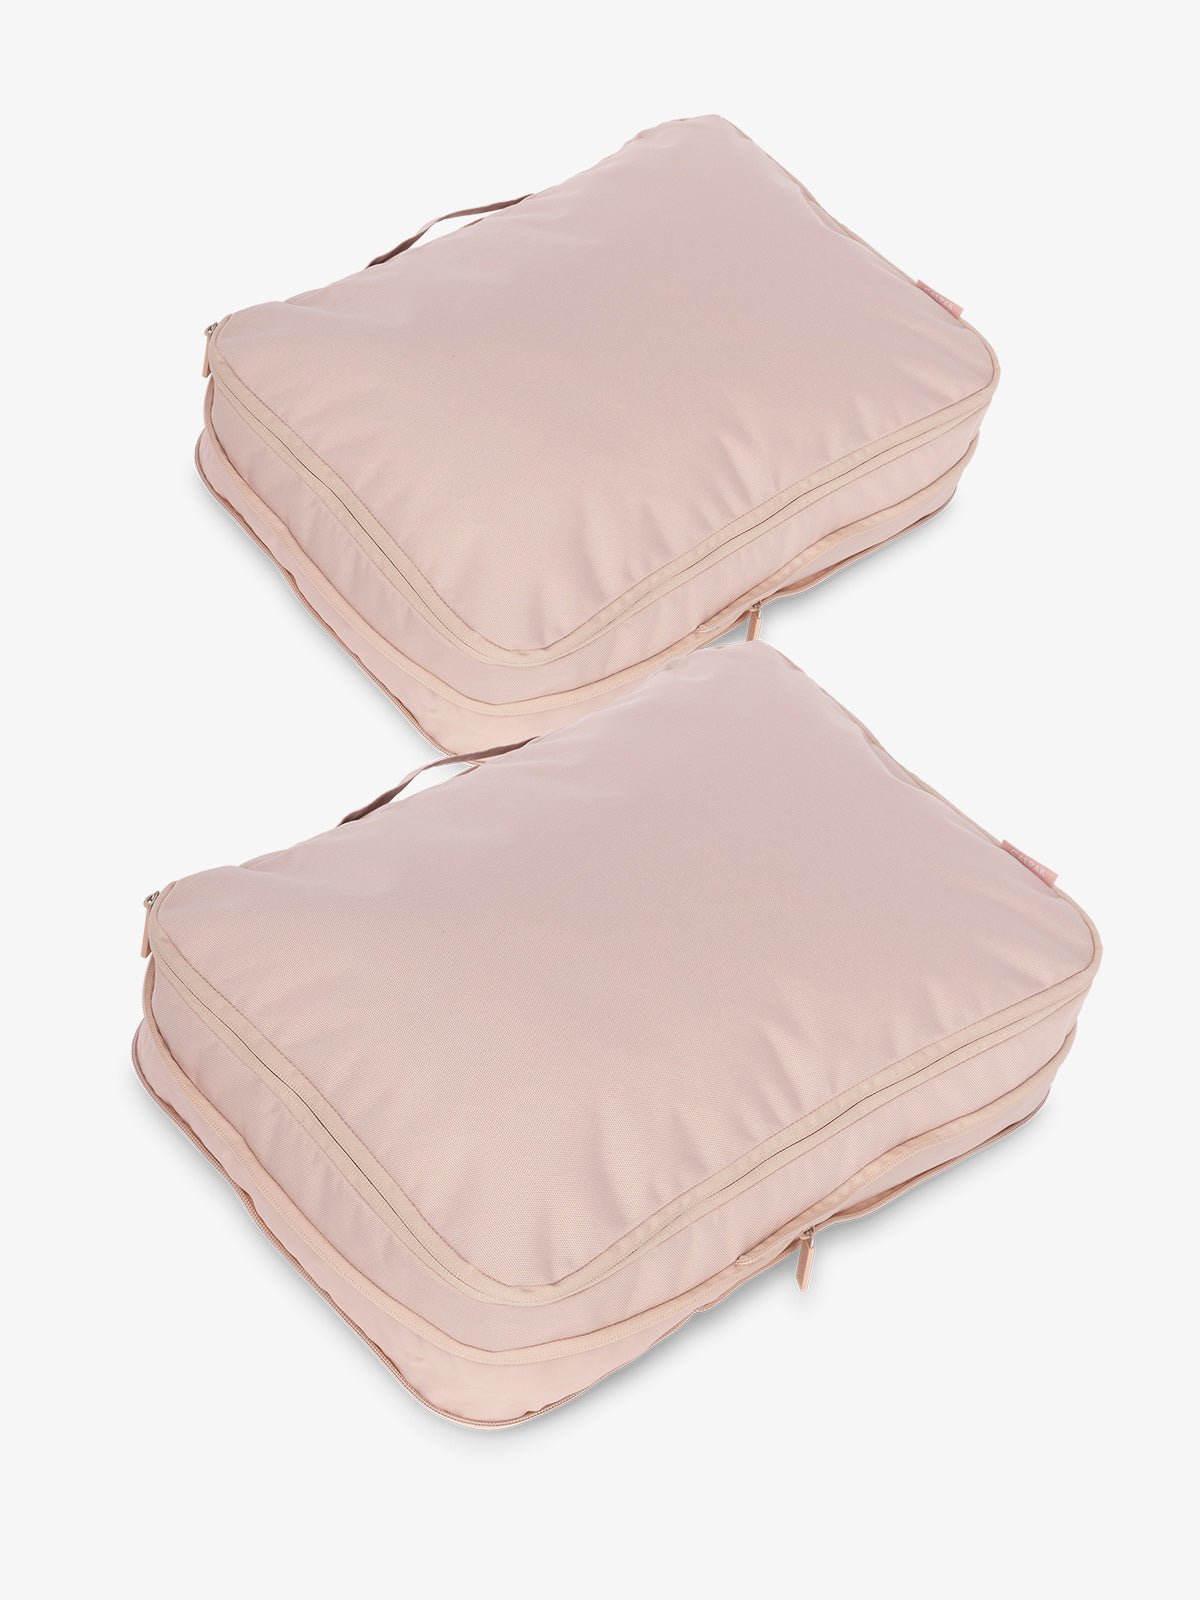 CALPAK large packing cubes with top handles and expandable by 4.5 inches in light pink